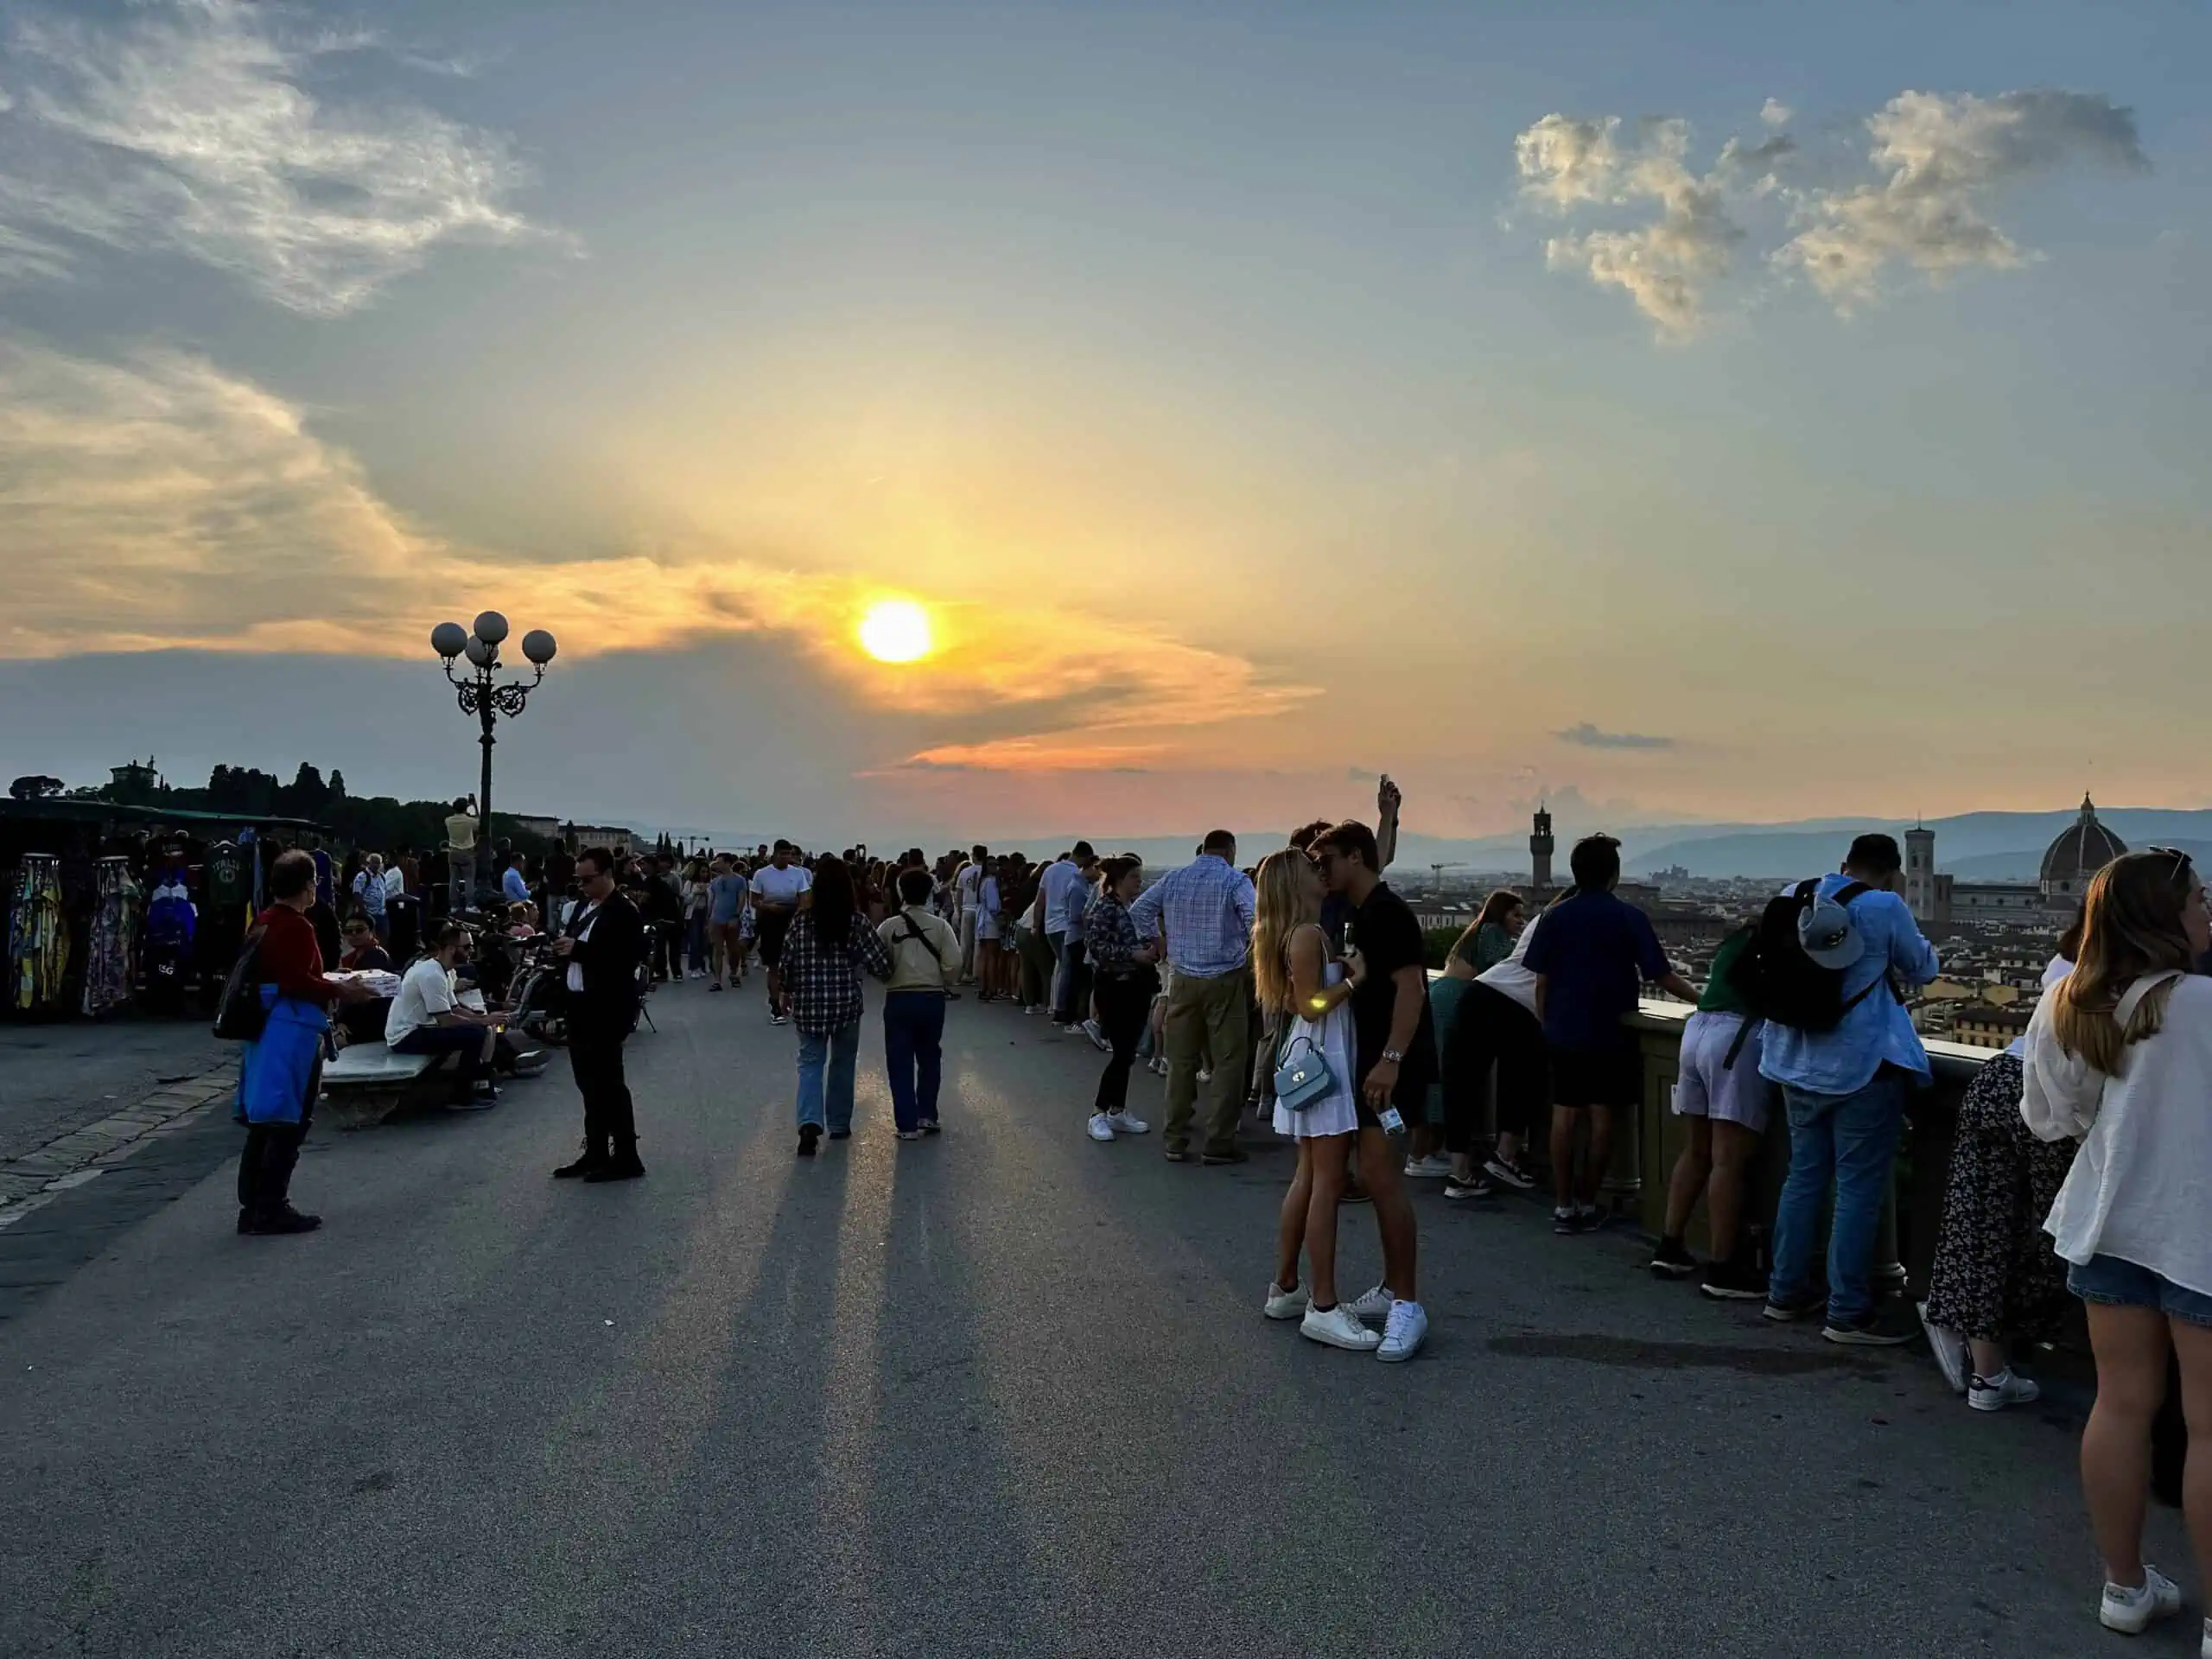 Crowds in Piazzale Michelangelo in Florence, Italy at sunset.